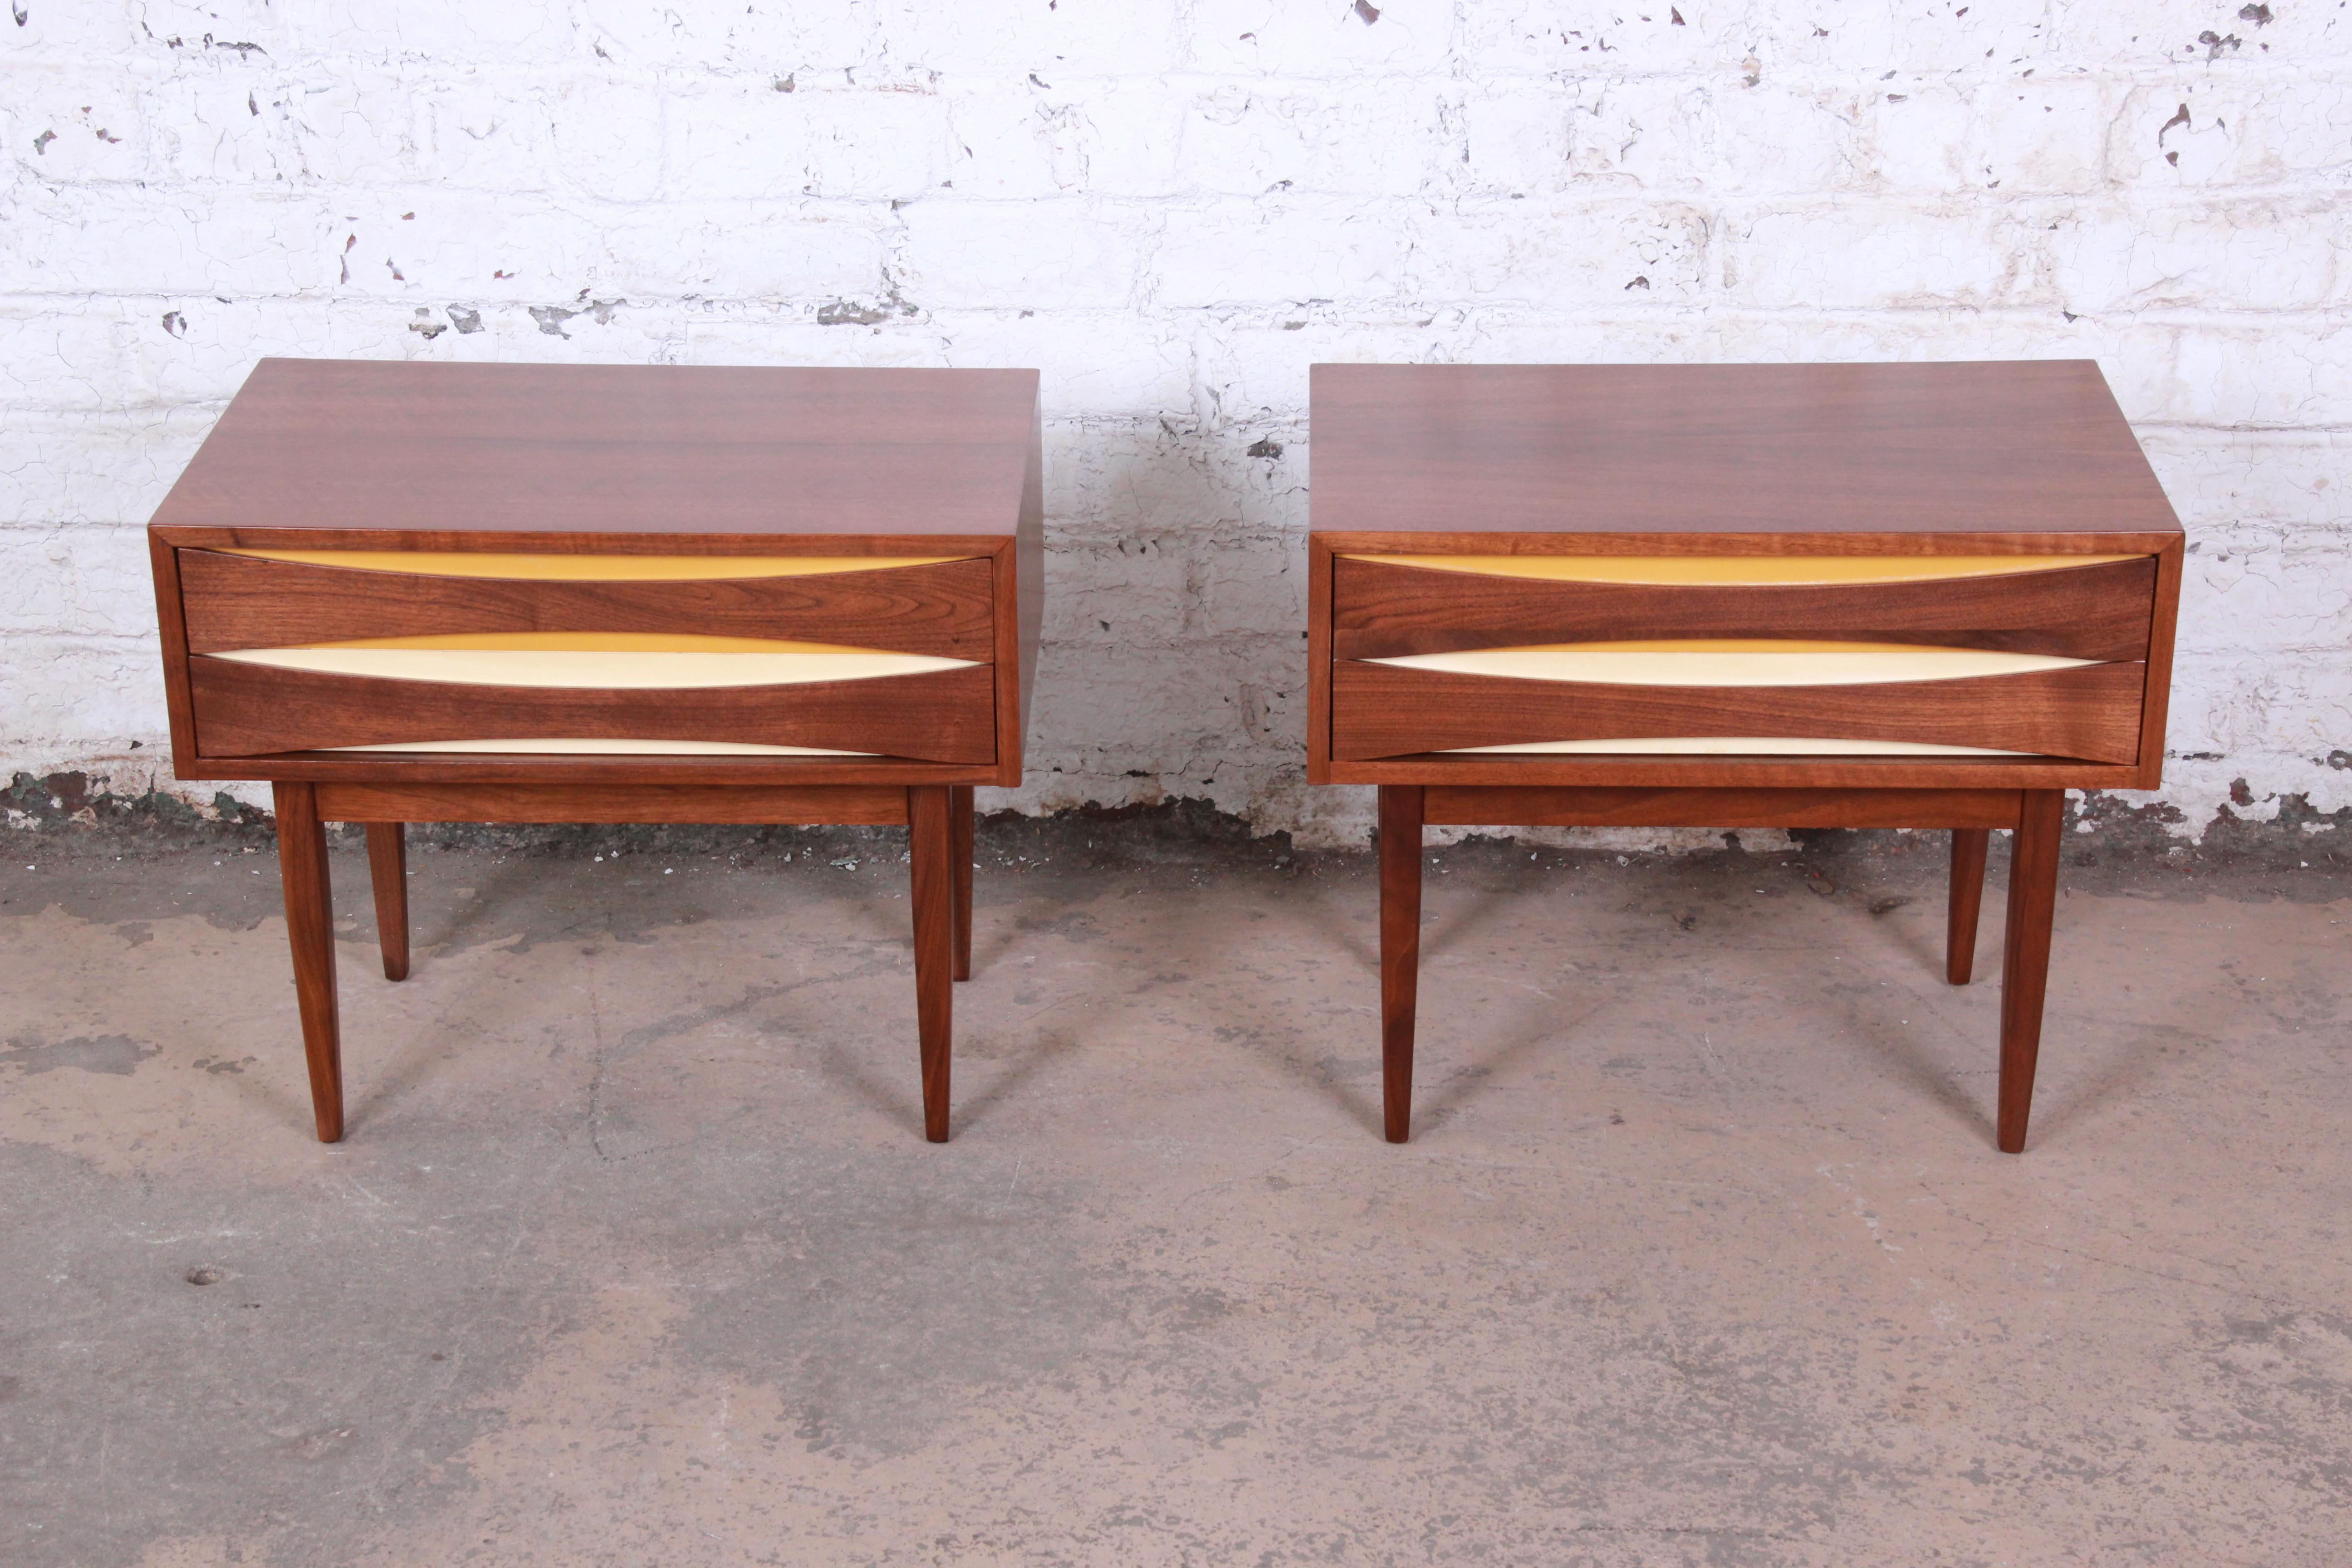 An exceptional pair of Arne Vodder style Mid-Century Modern walnut nightstands by West Michigan Furniture. The nightstands have a beautiful walnut wood grain with sculpted pulls with a goldenrod and white backdrop on the drawers. They offer good